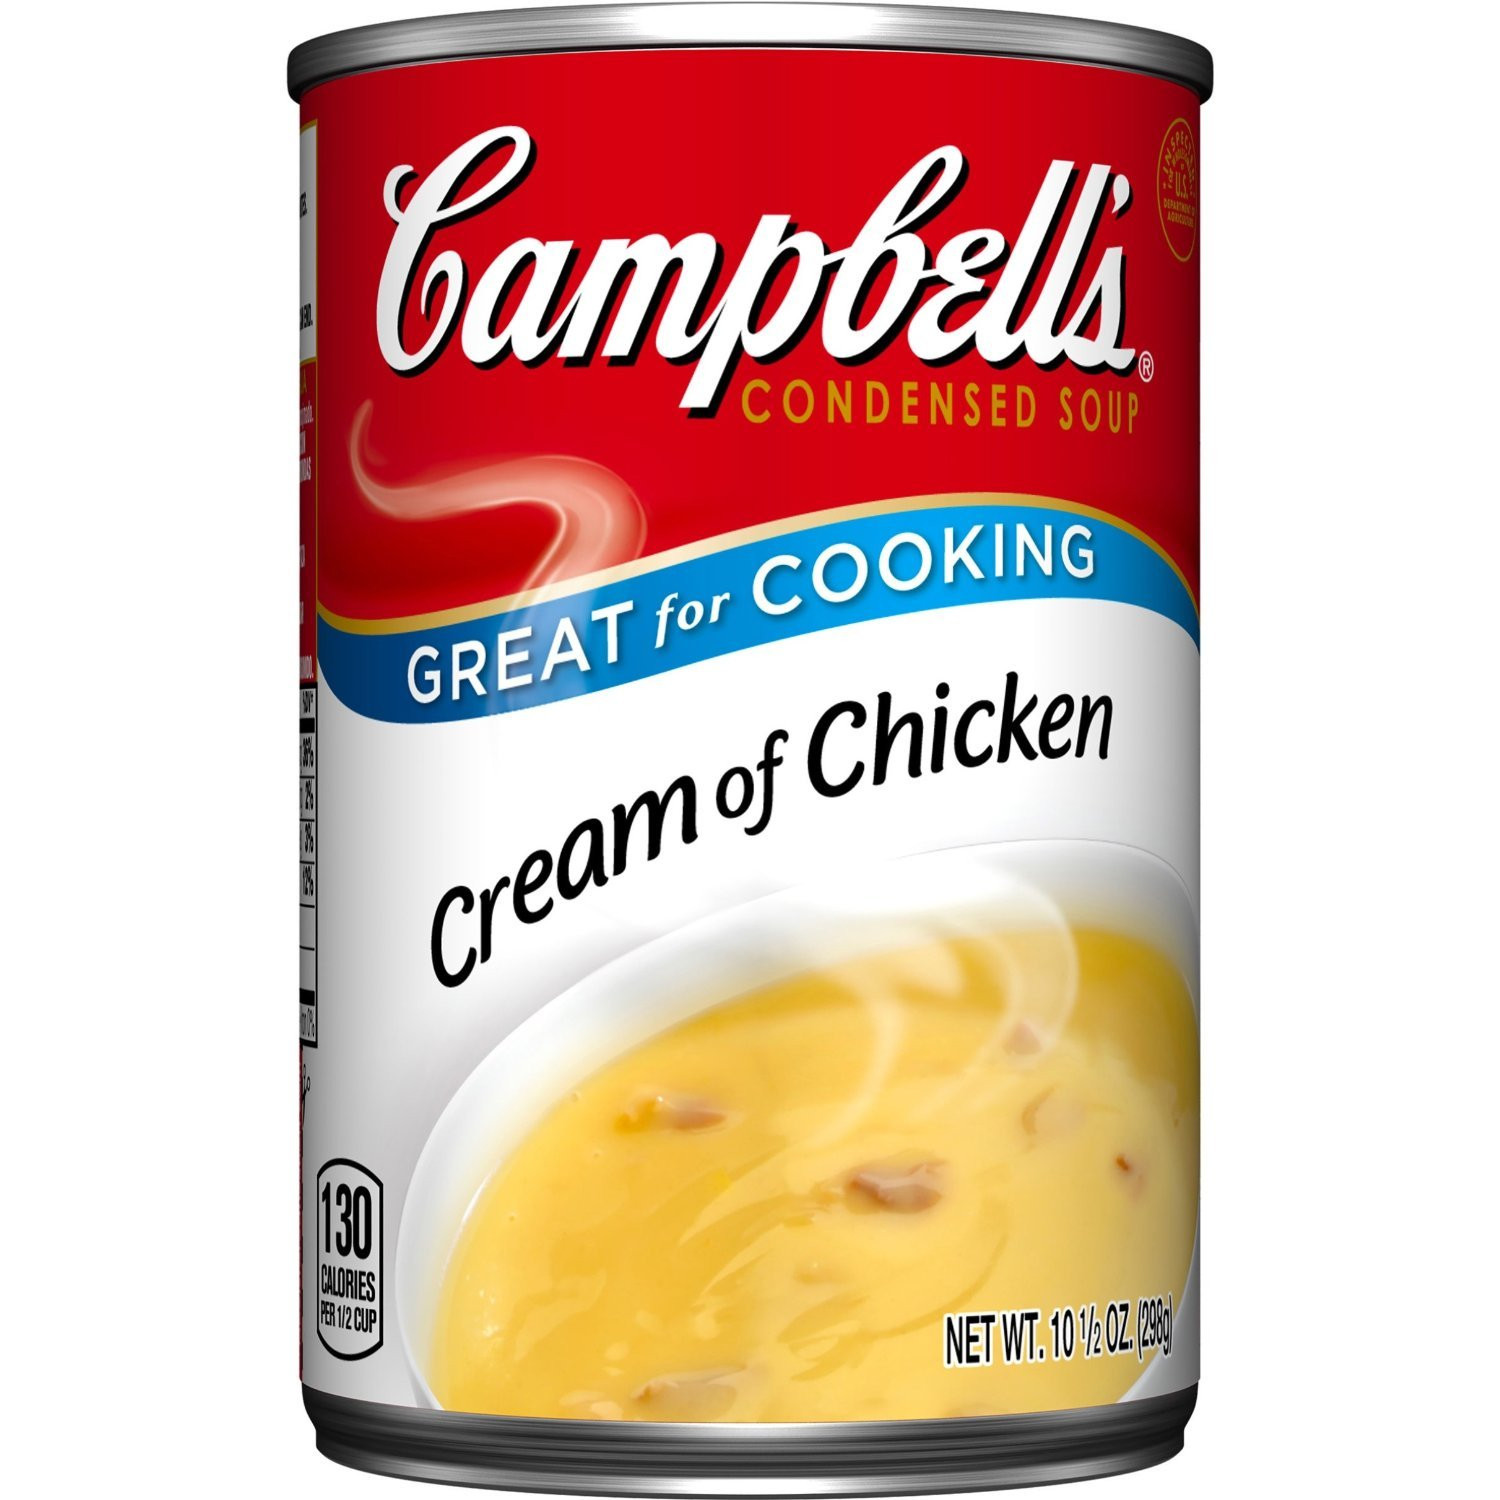 Campbells Recipes With Cream Of Chicken Soup
 campbell s cream of chicken gravy recipe